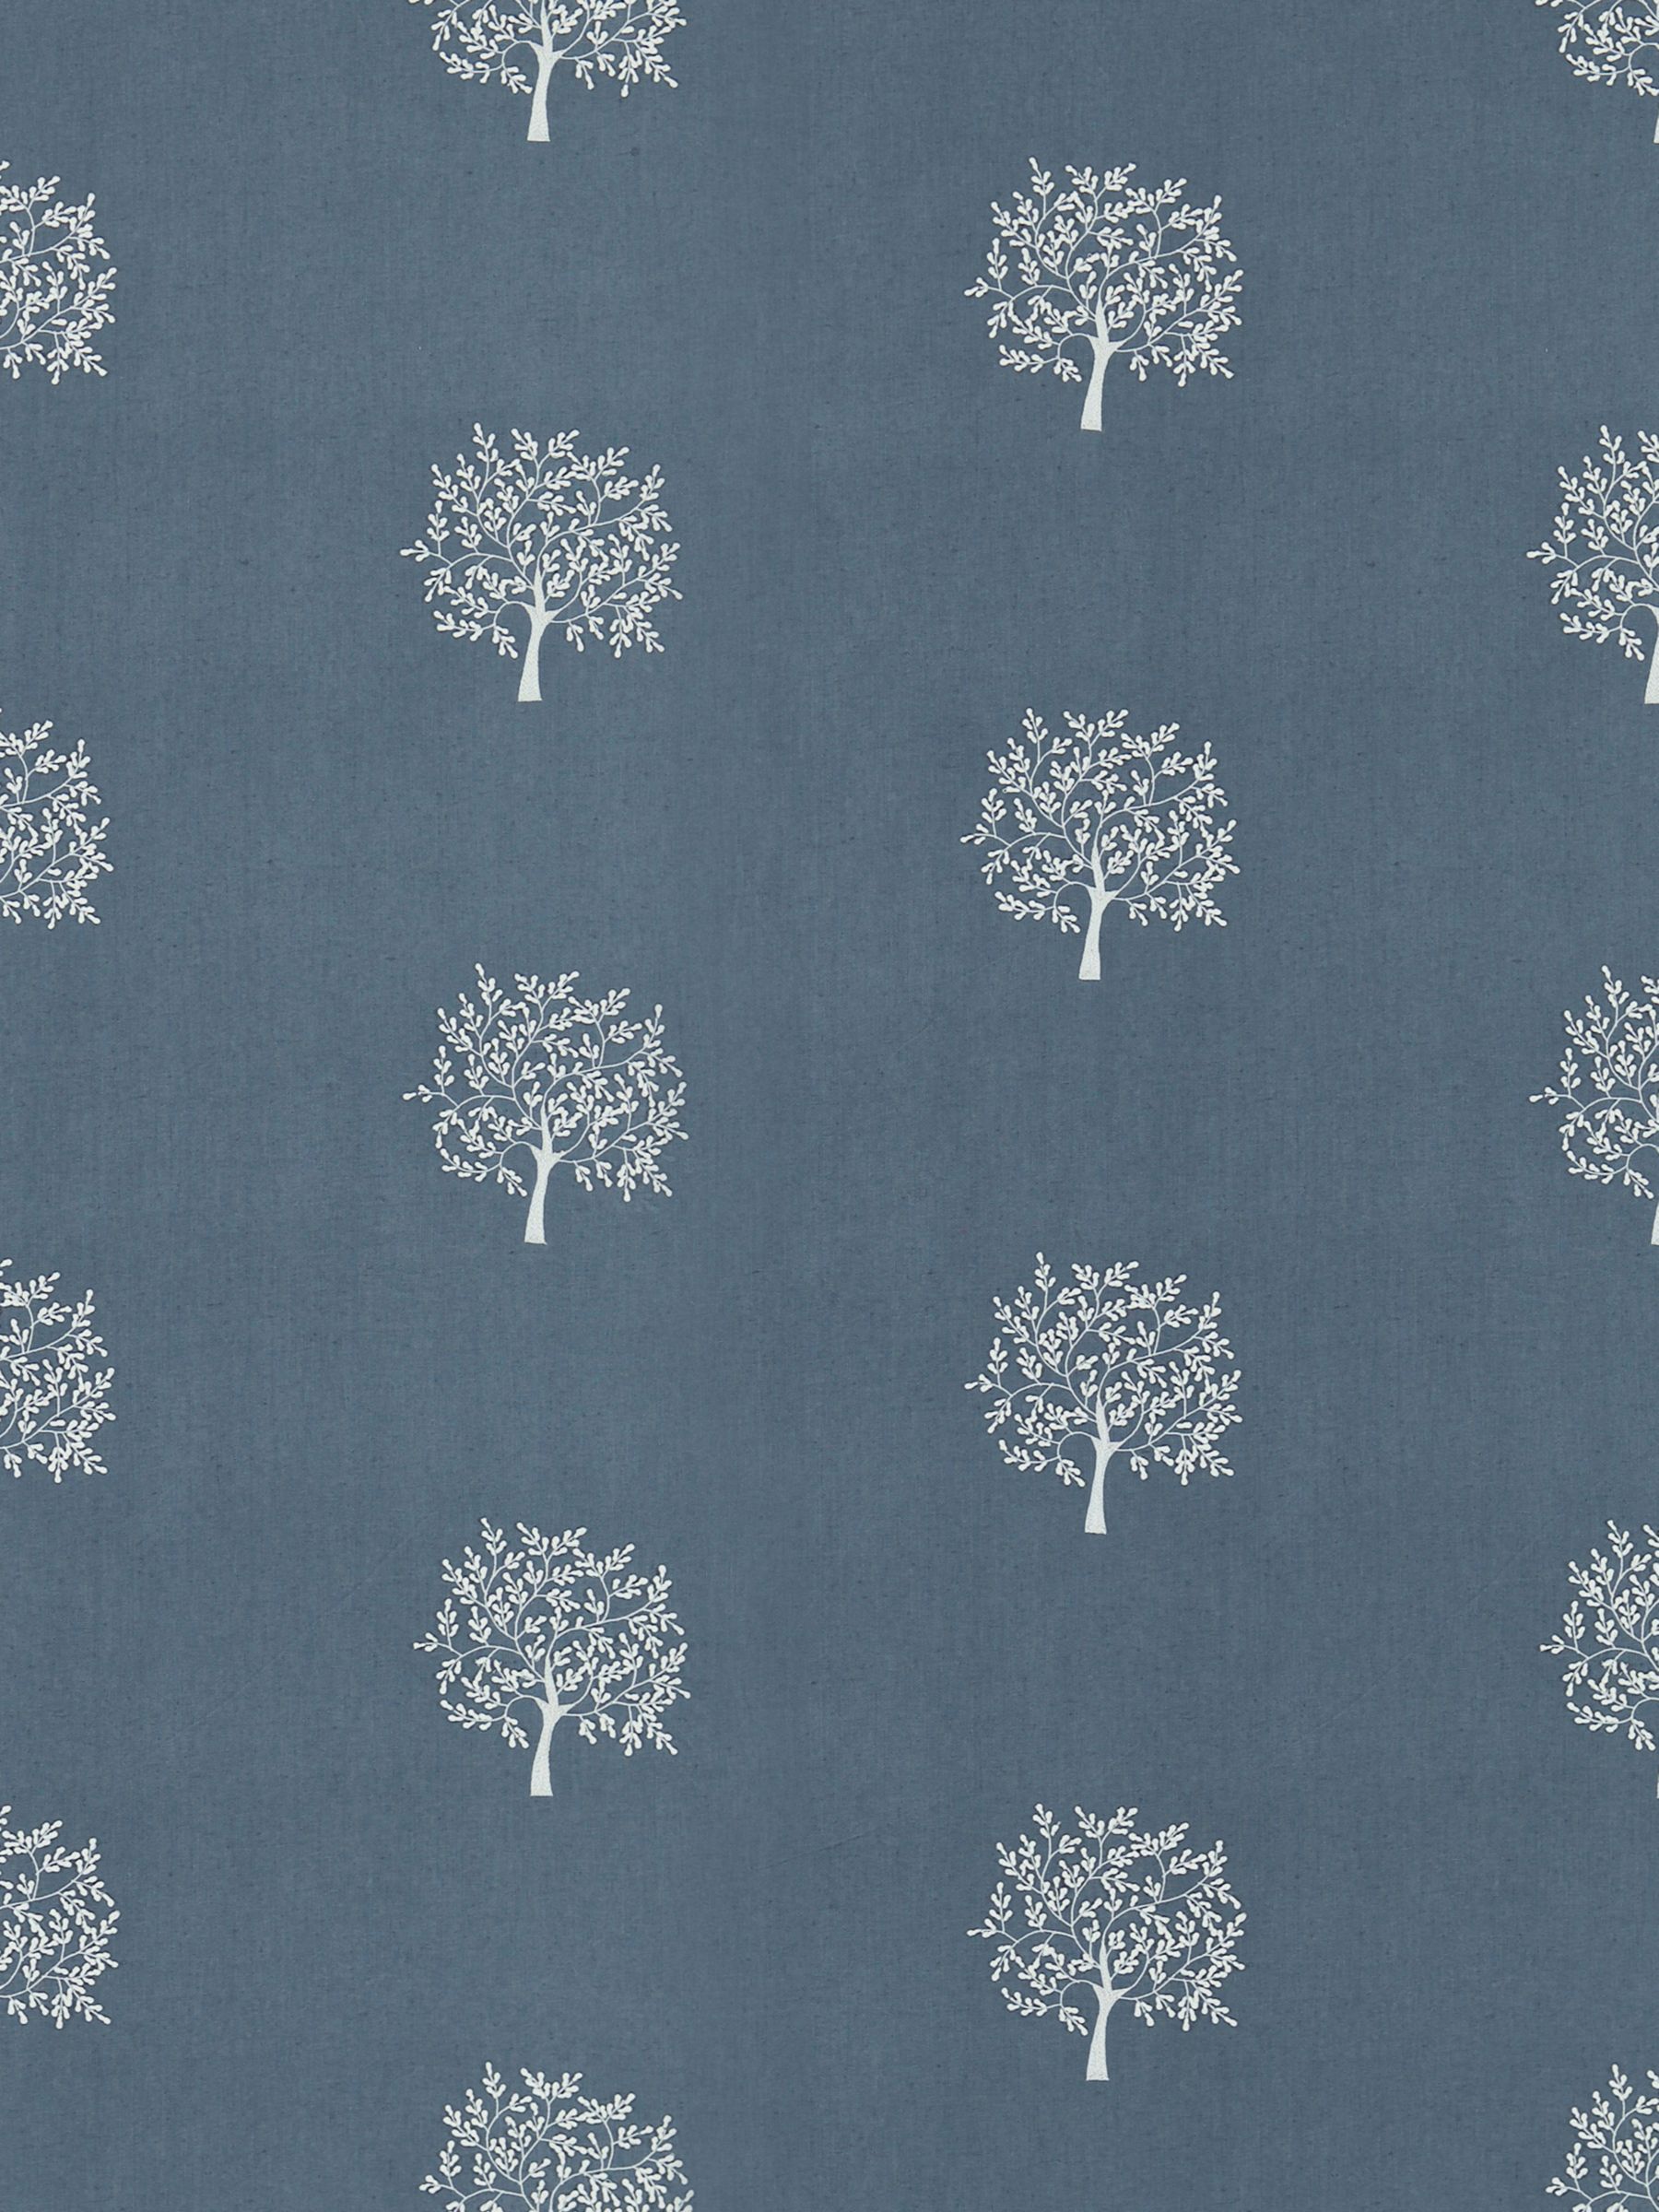 Morris & Co. Woodland Tree Made to Measure Curtains, Grey/Blue/Ivory